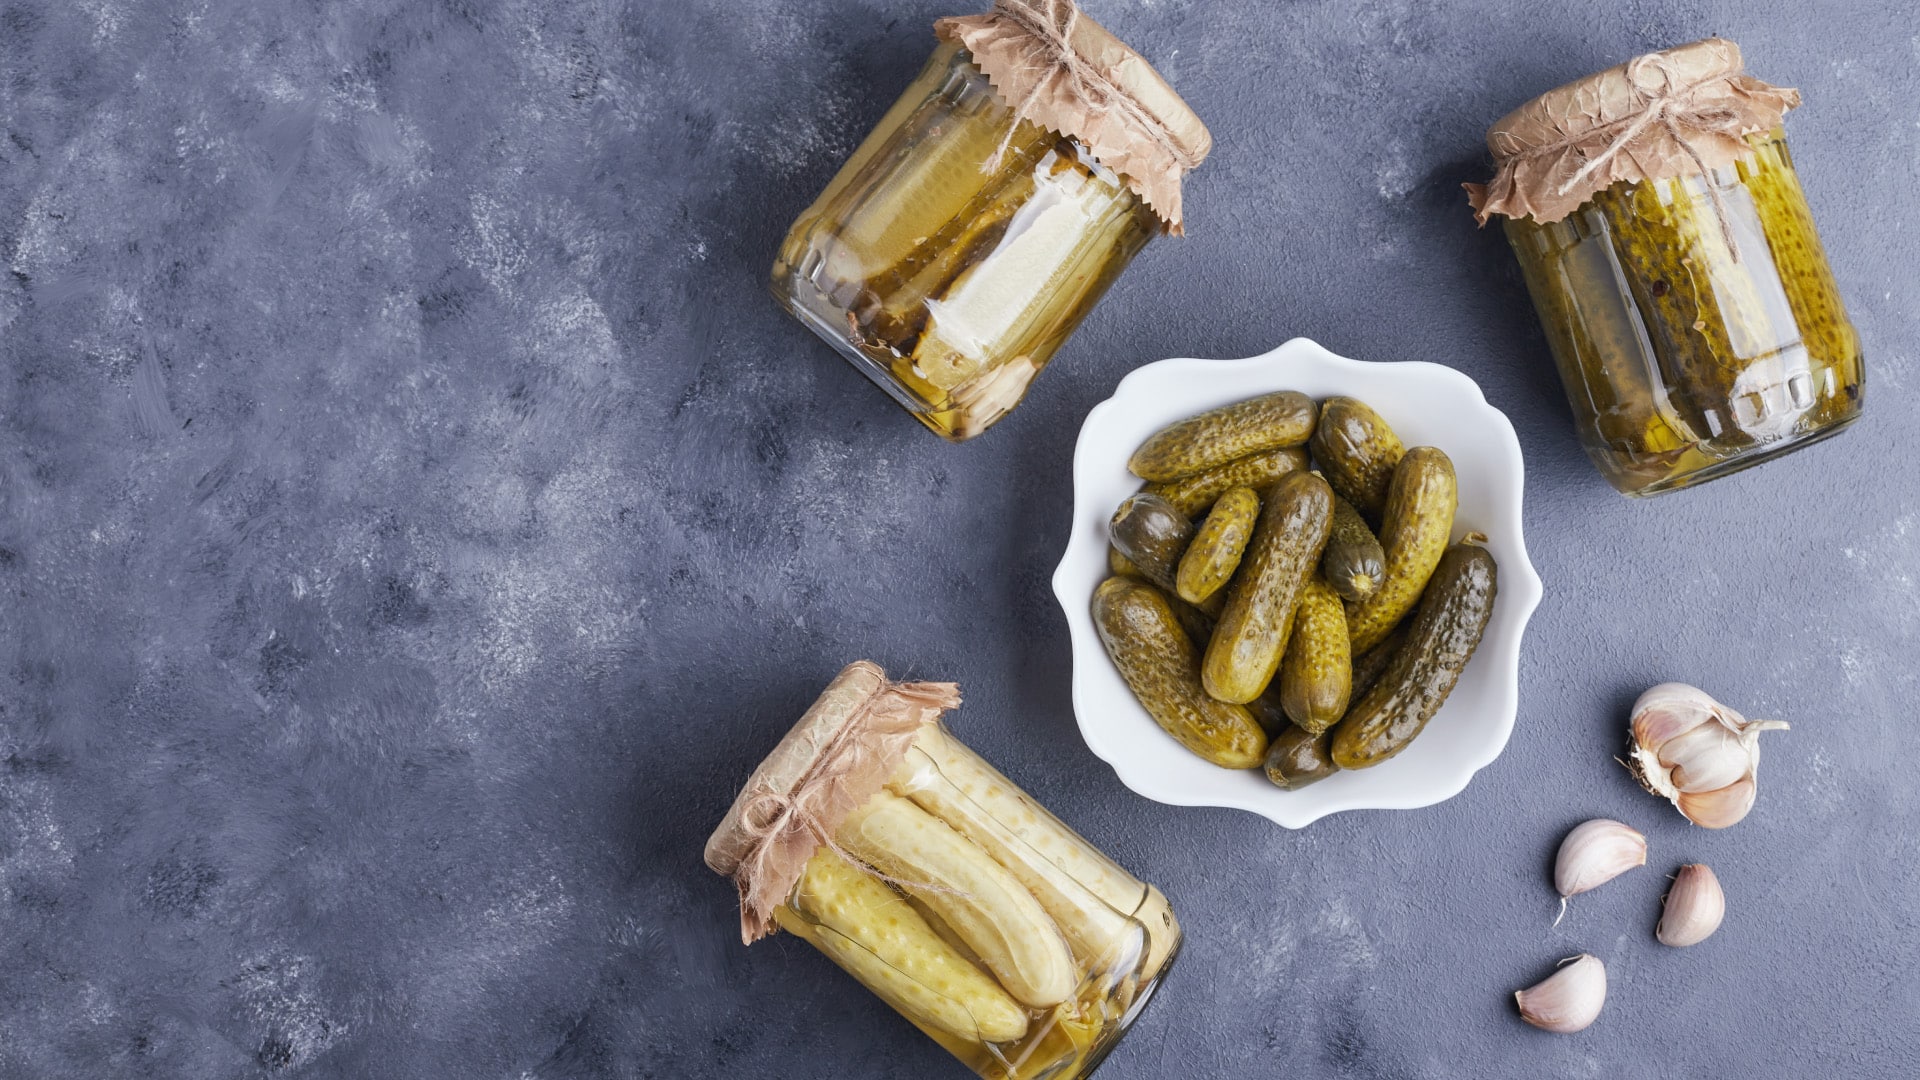 Pickles in World Culture